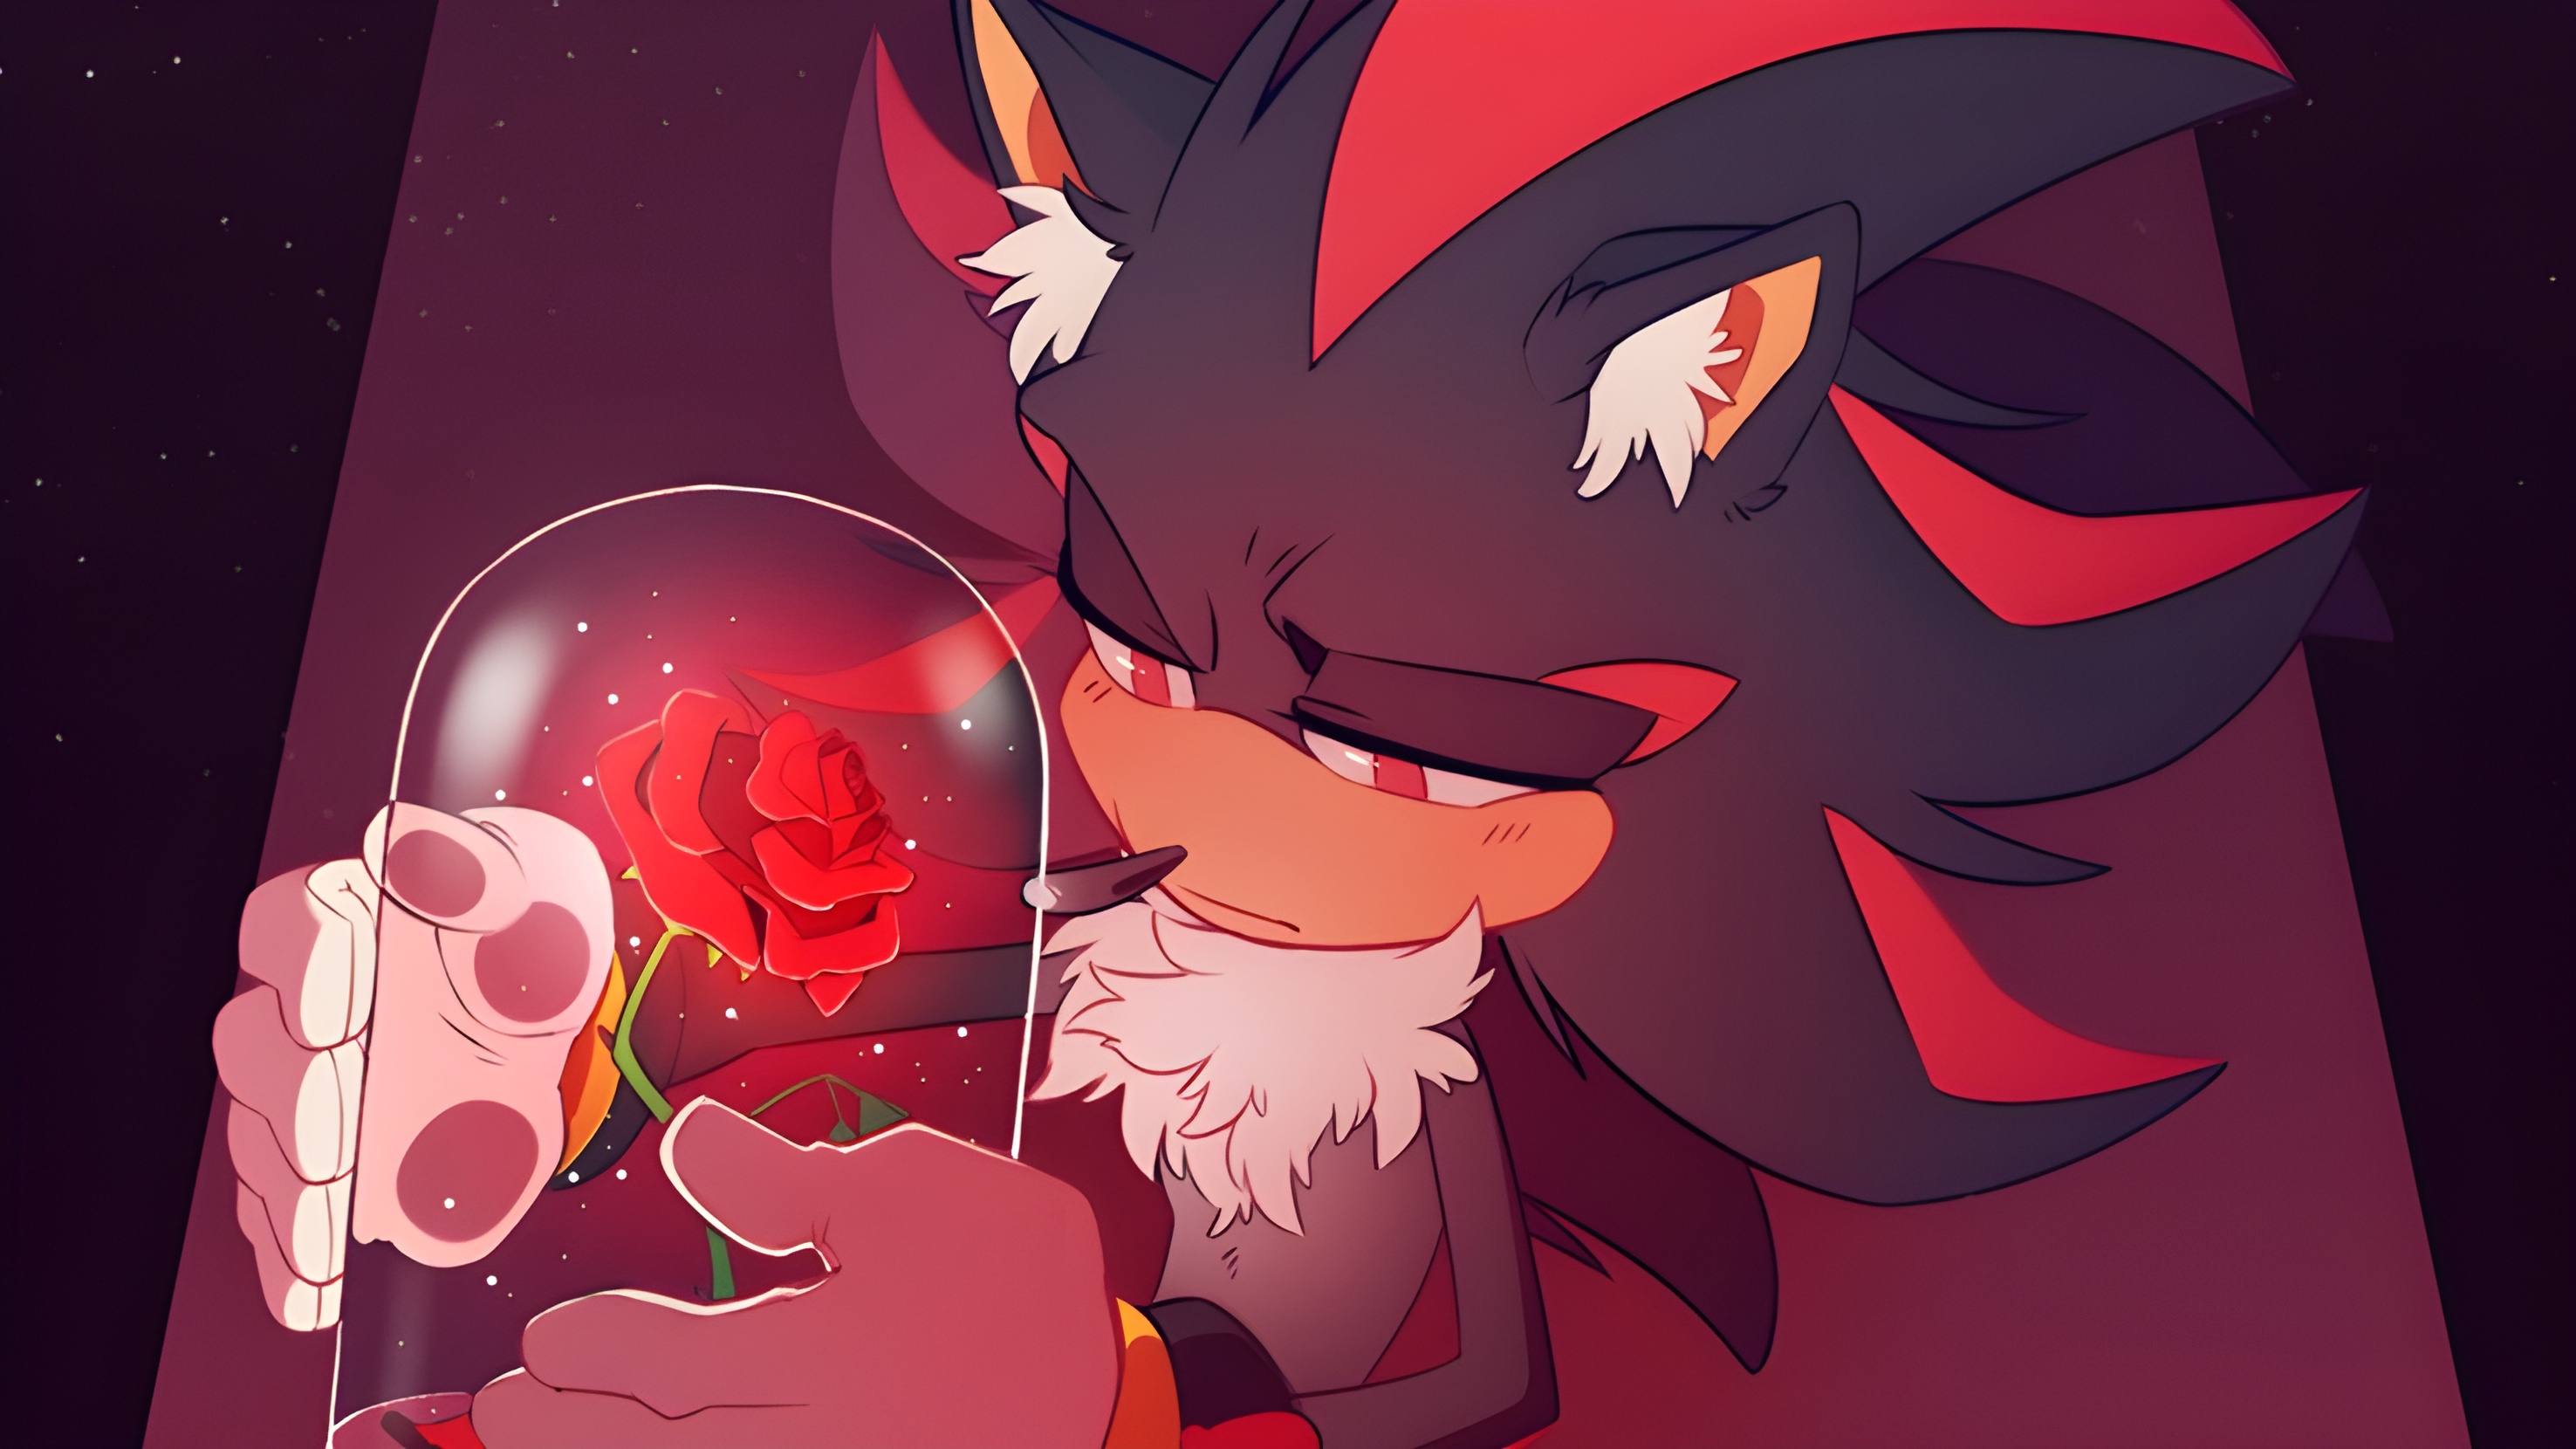 Fanart of Shadow being wholesome (art by me) : r/SonicTheHedgehog